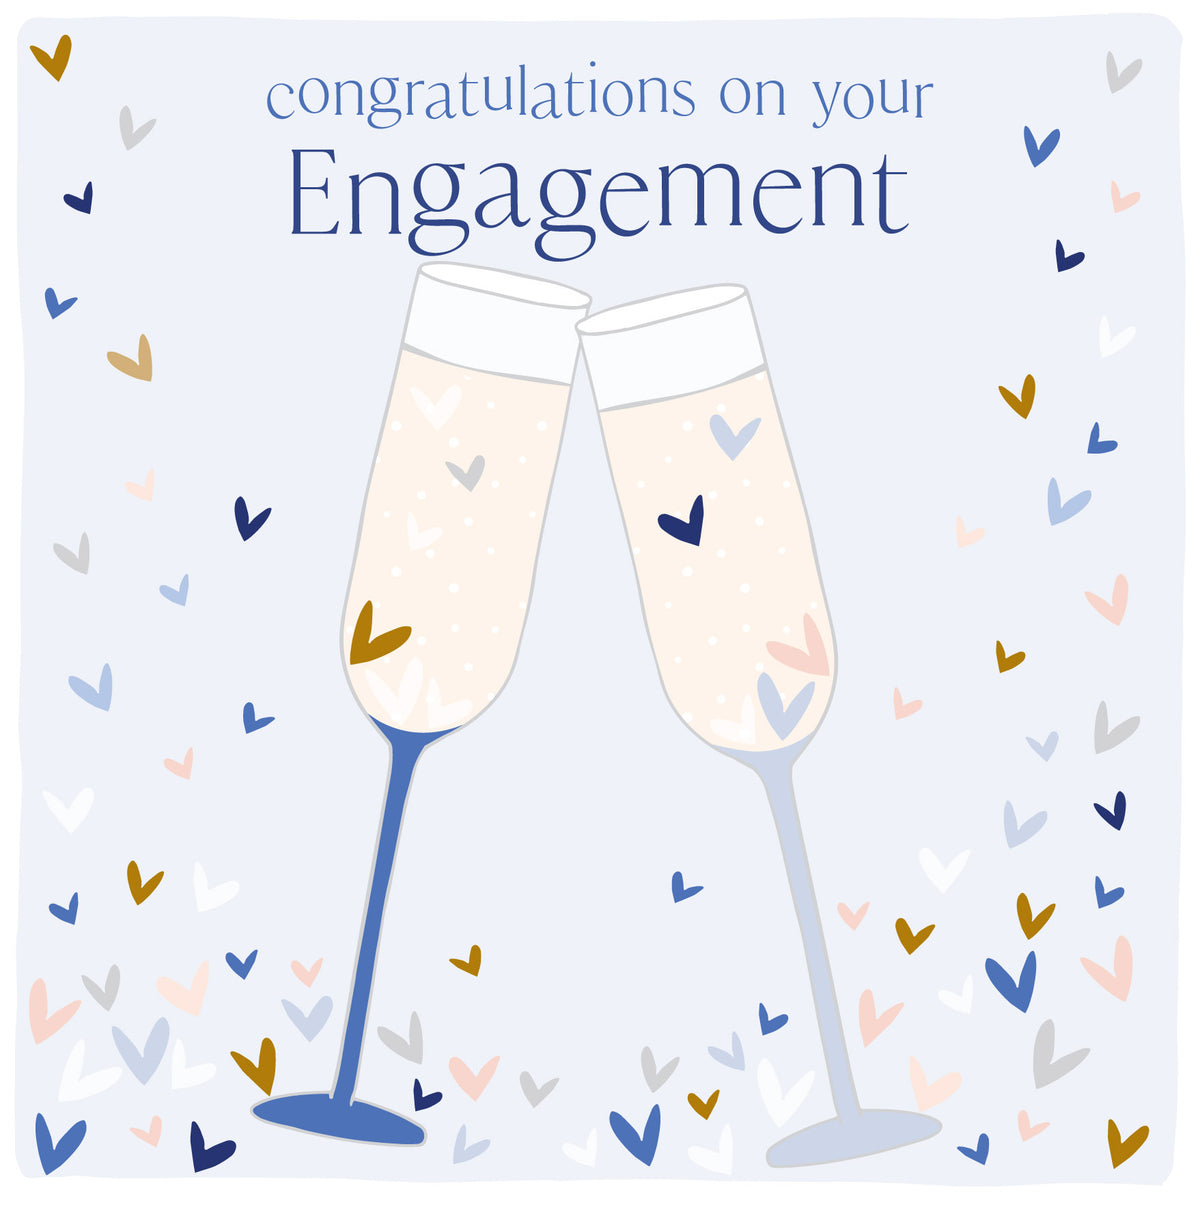 A square greetings card with a light blue background and two filled champagne flutes clinking. The words above this say &#39;Congratulations on your engagement&#39; in dark blue. There is a scattering of pink, white, grey and blue tiny hearts across the image also.